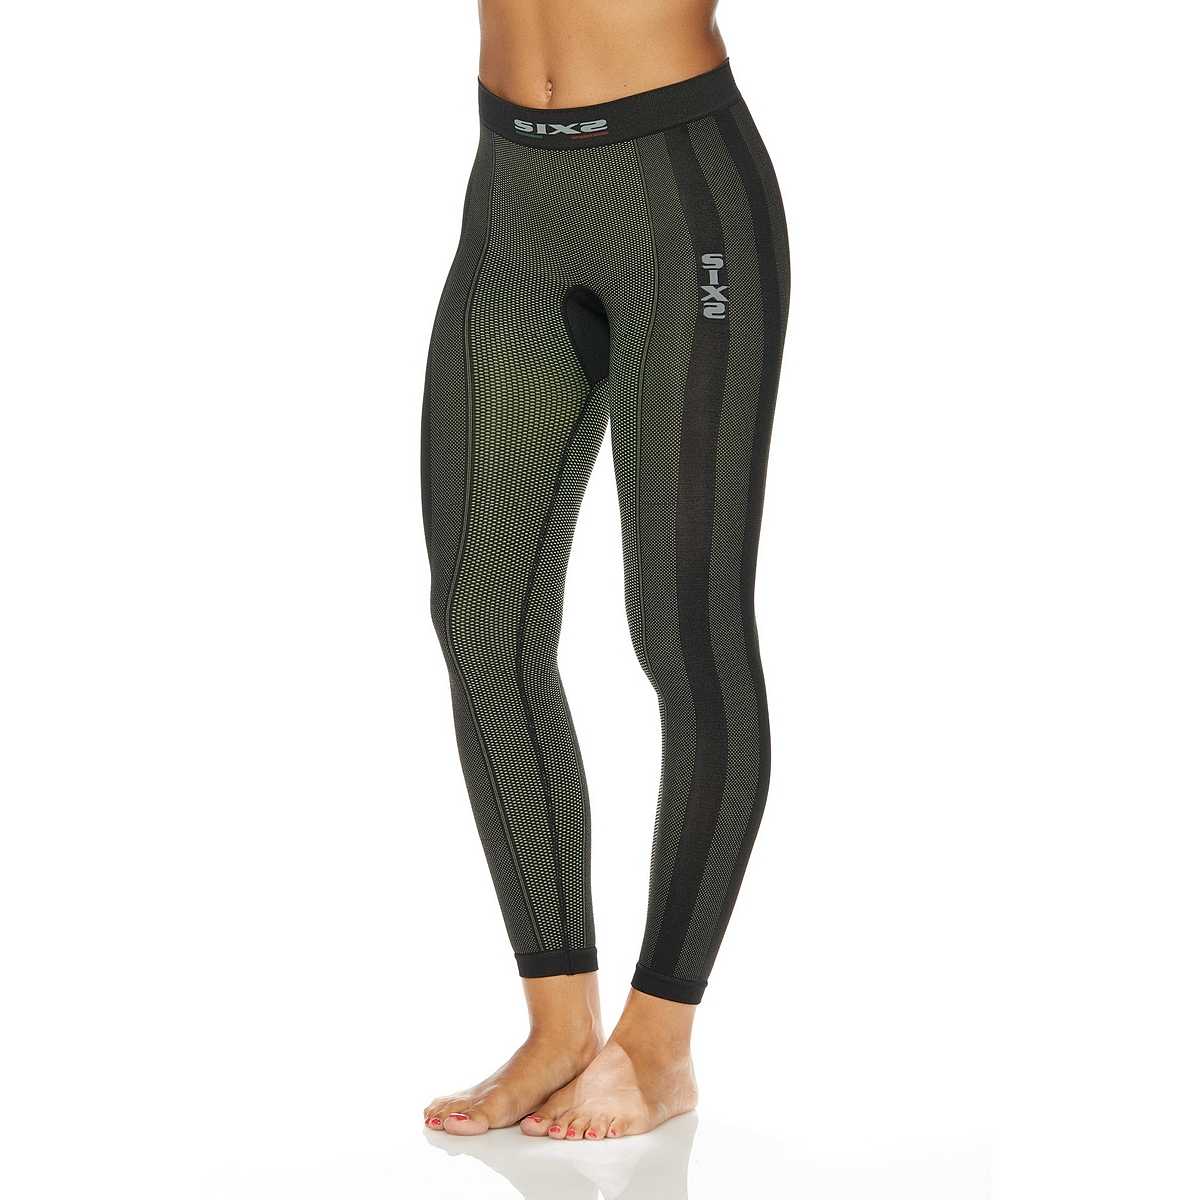 Technical pants Intimates Sixs Leggings Carbon Dark Green For Sale